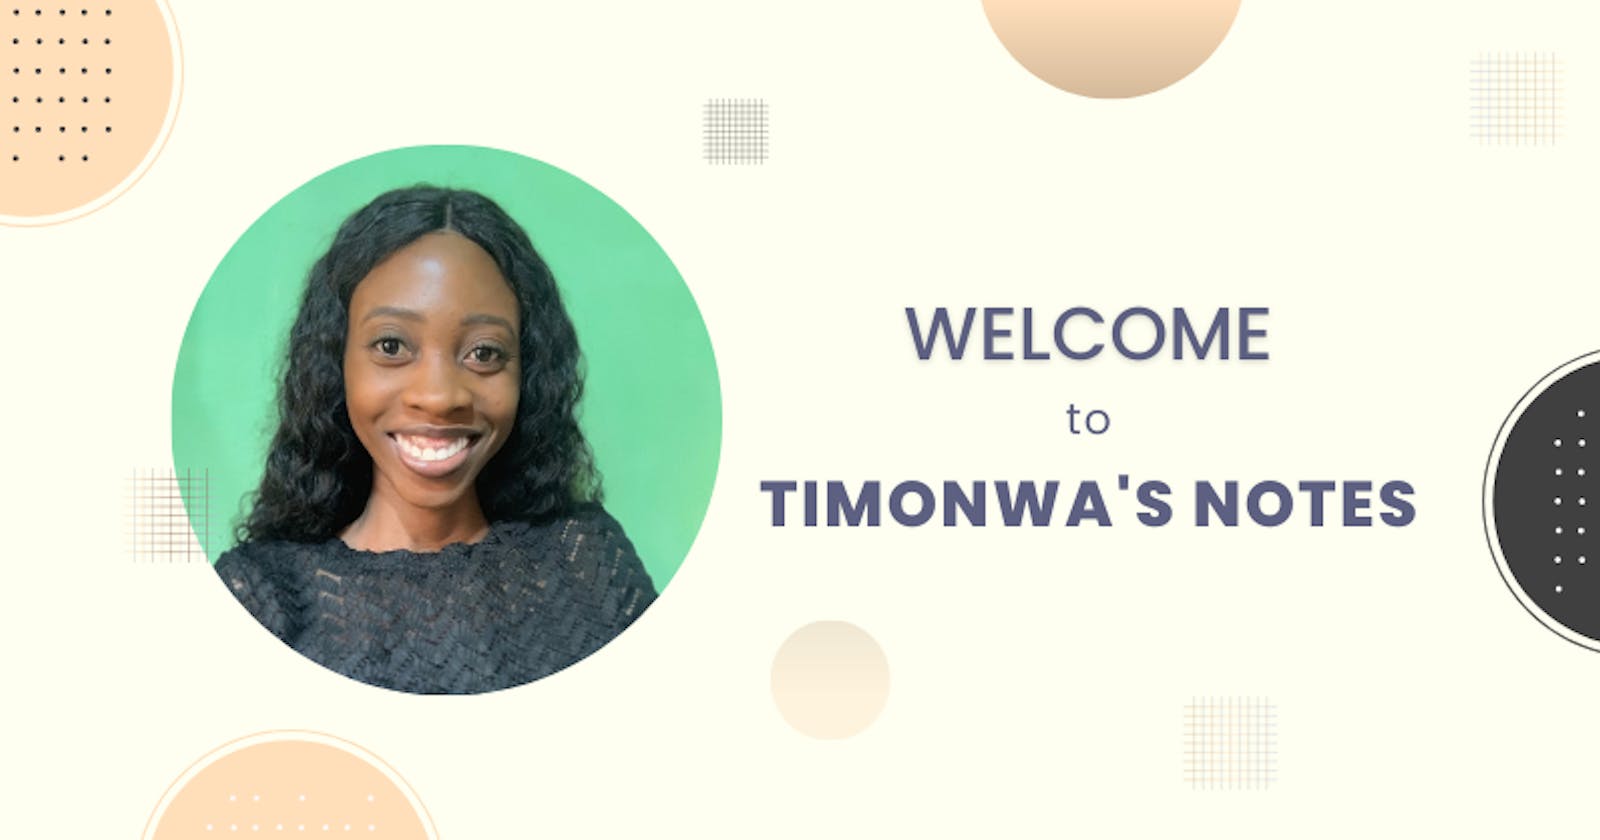 Welcome to Timonwa's Notes: A Guide for New Visitors!